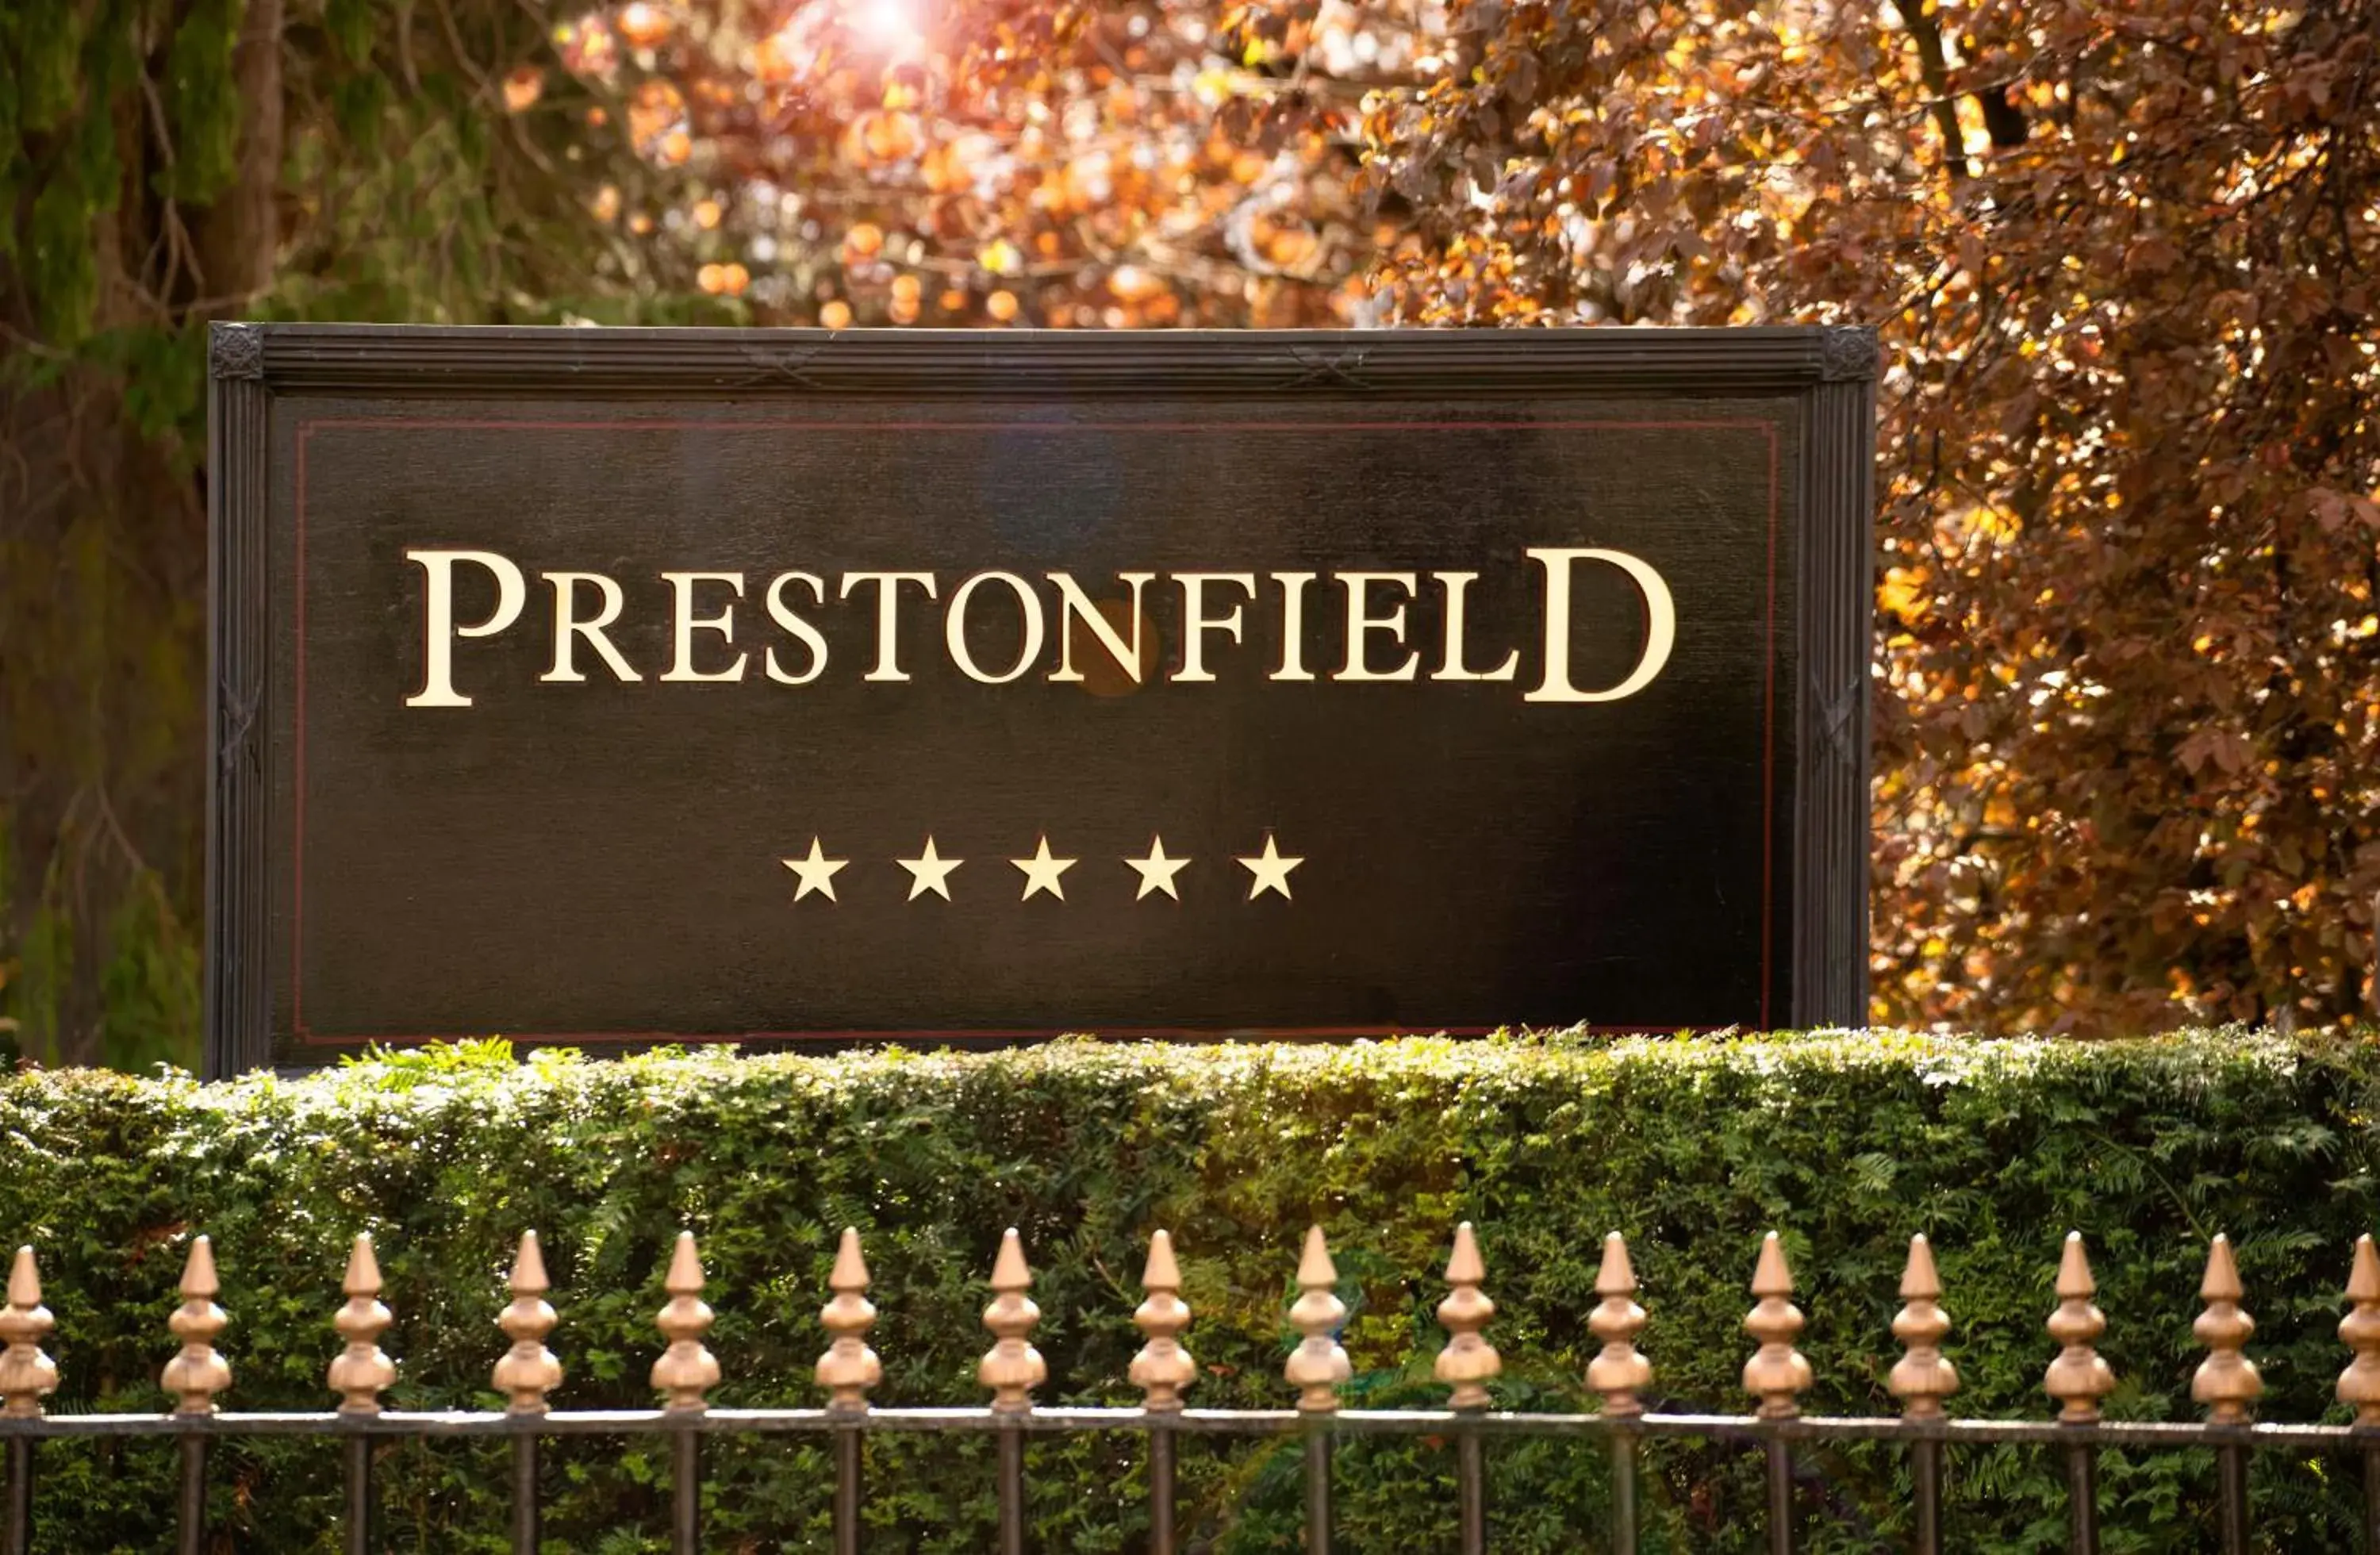 Property logo or sign in Prestonfield House